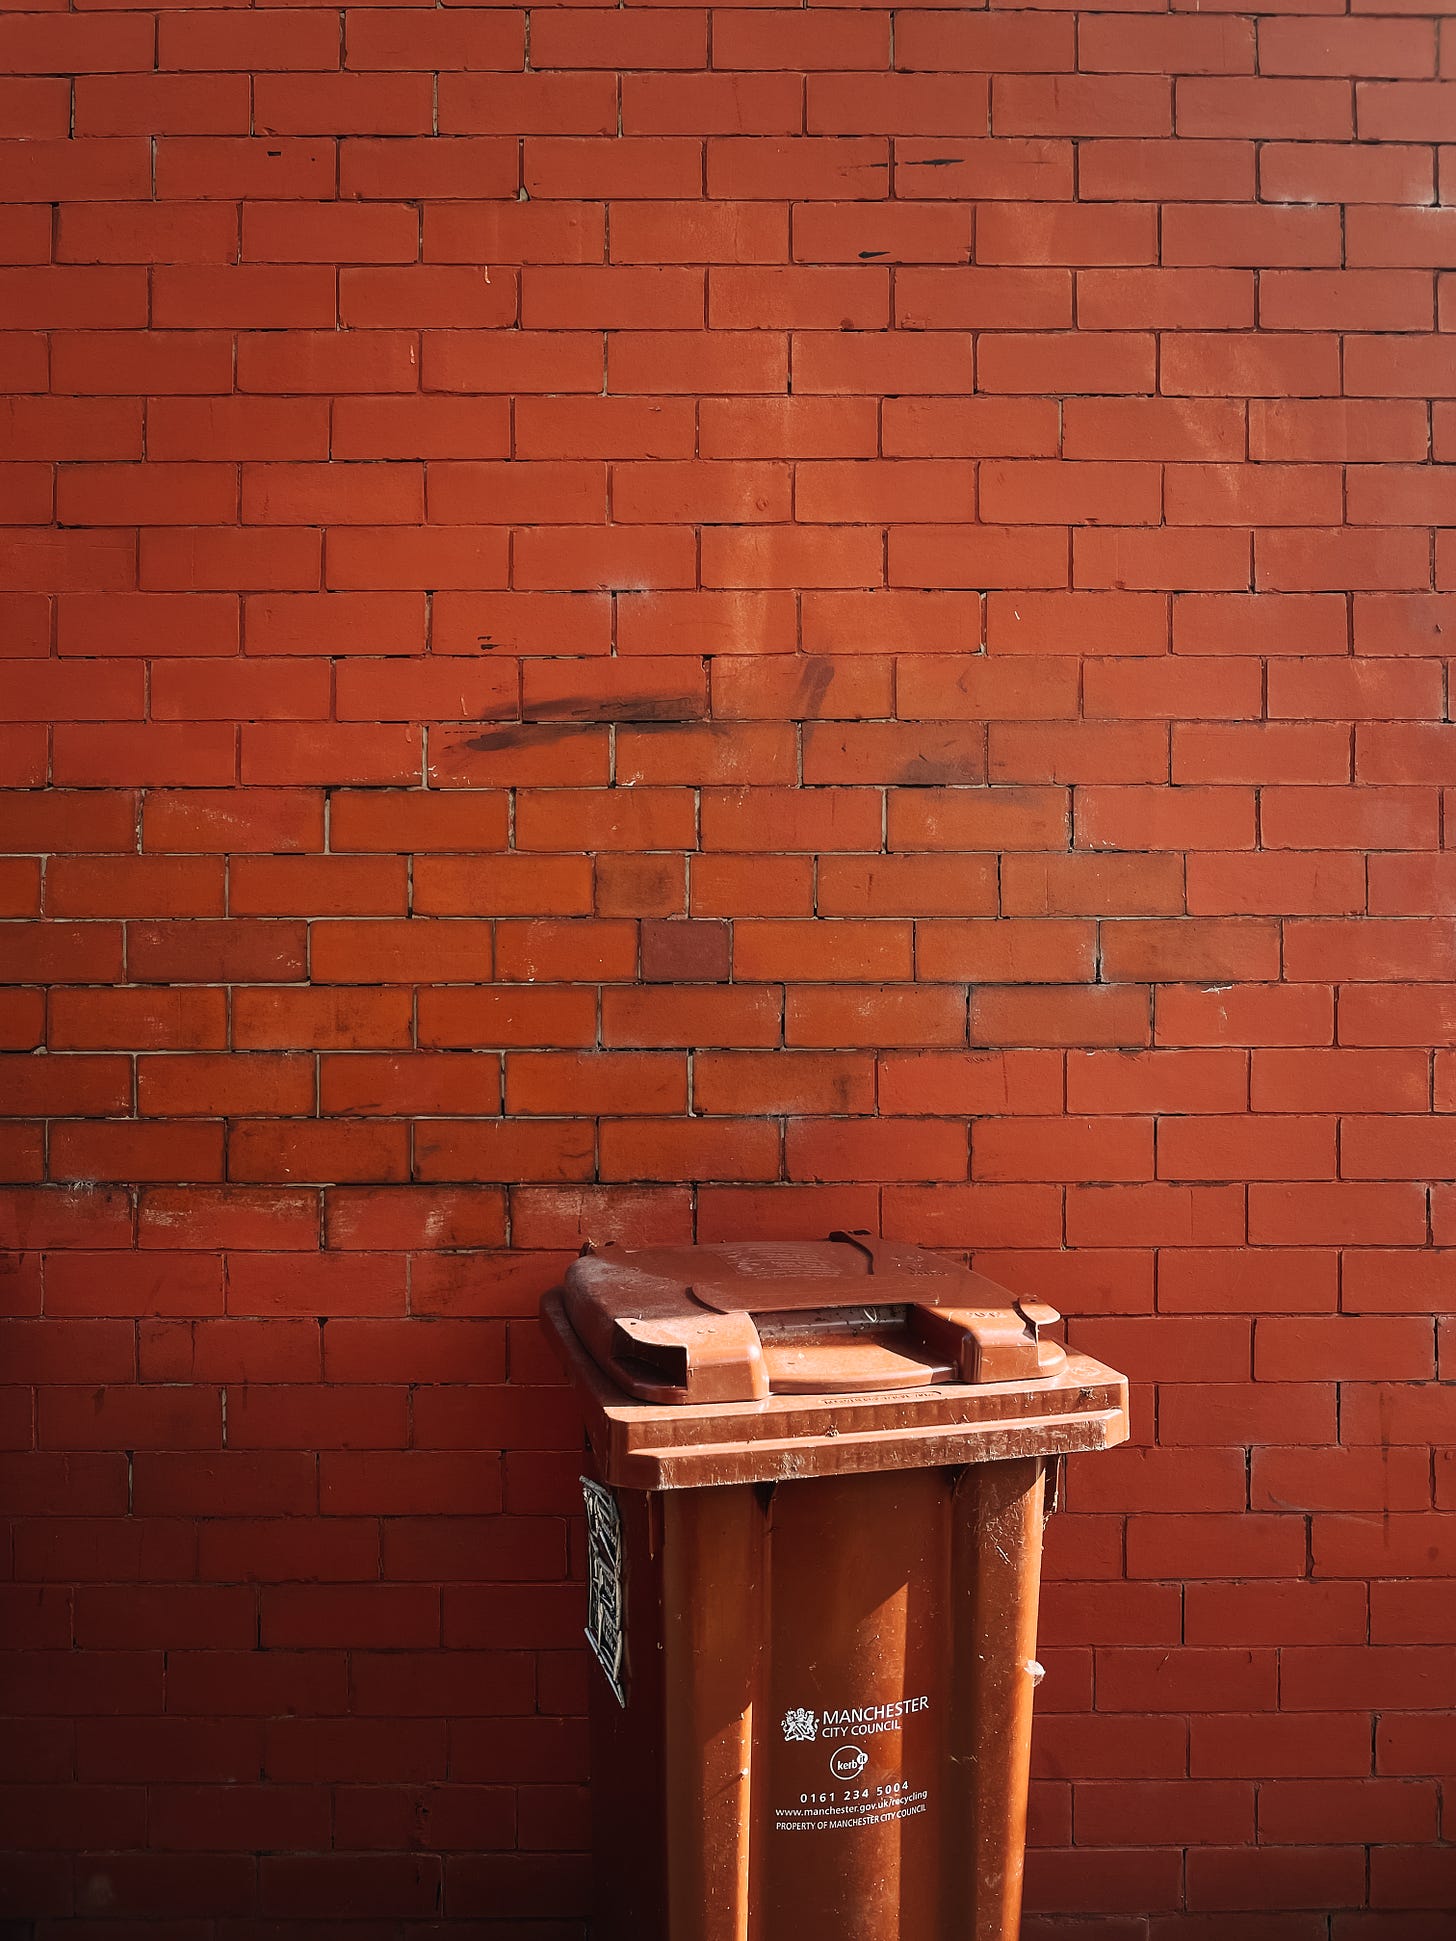 A brick wall with a big plastic dustbin in front of it in the same colour. The bin has writing on it saying "Manchester City Council"